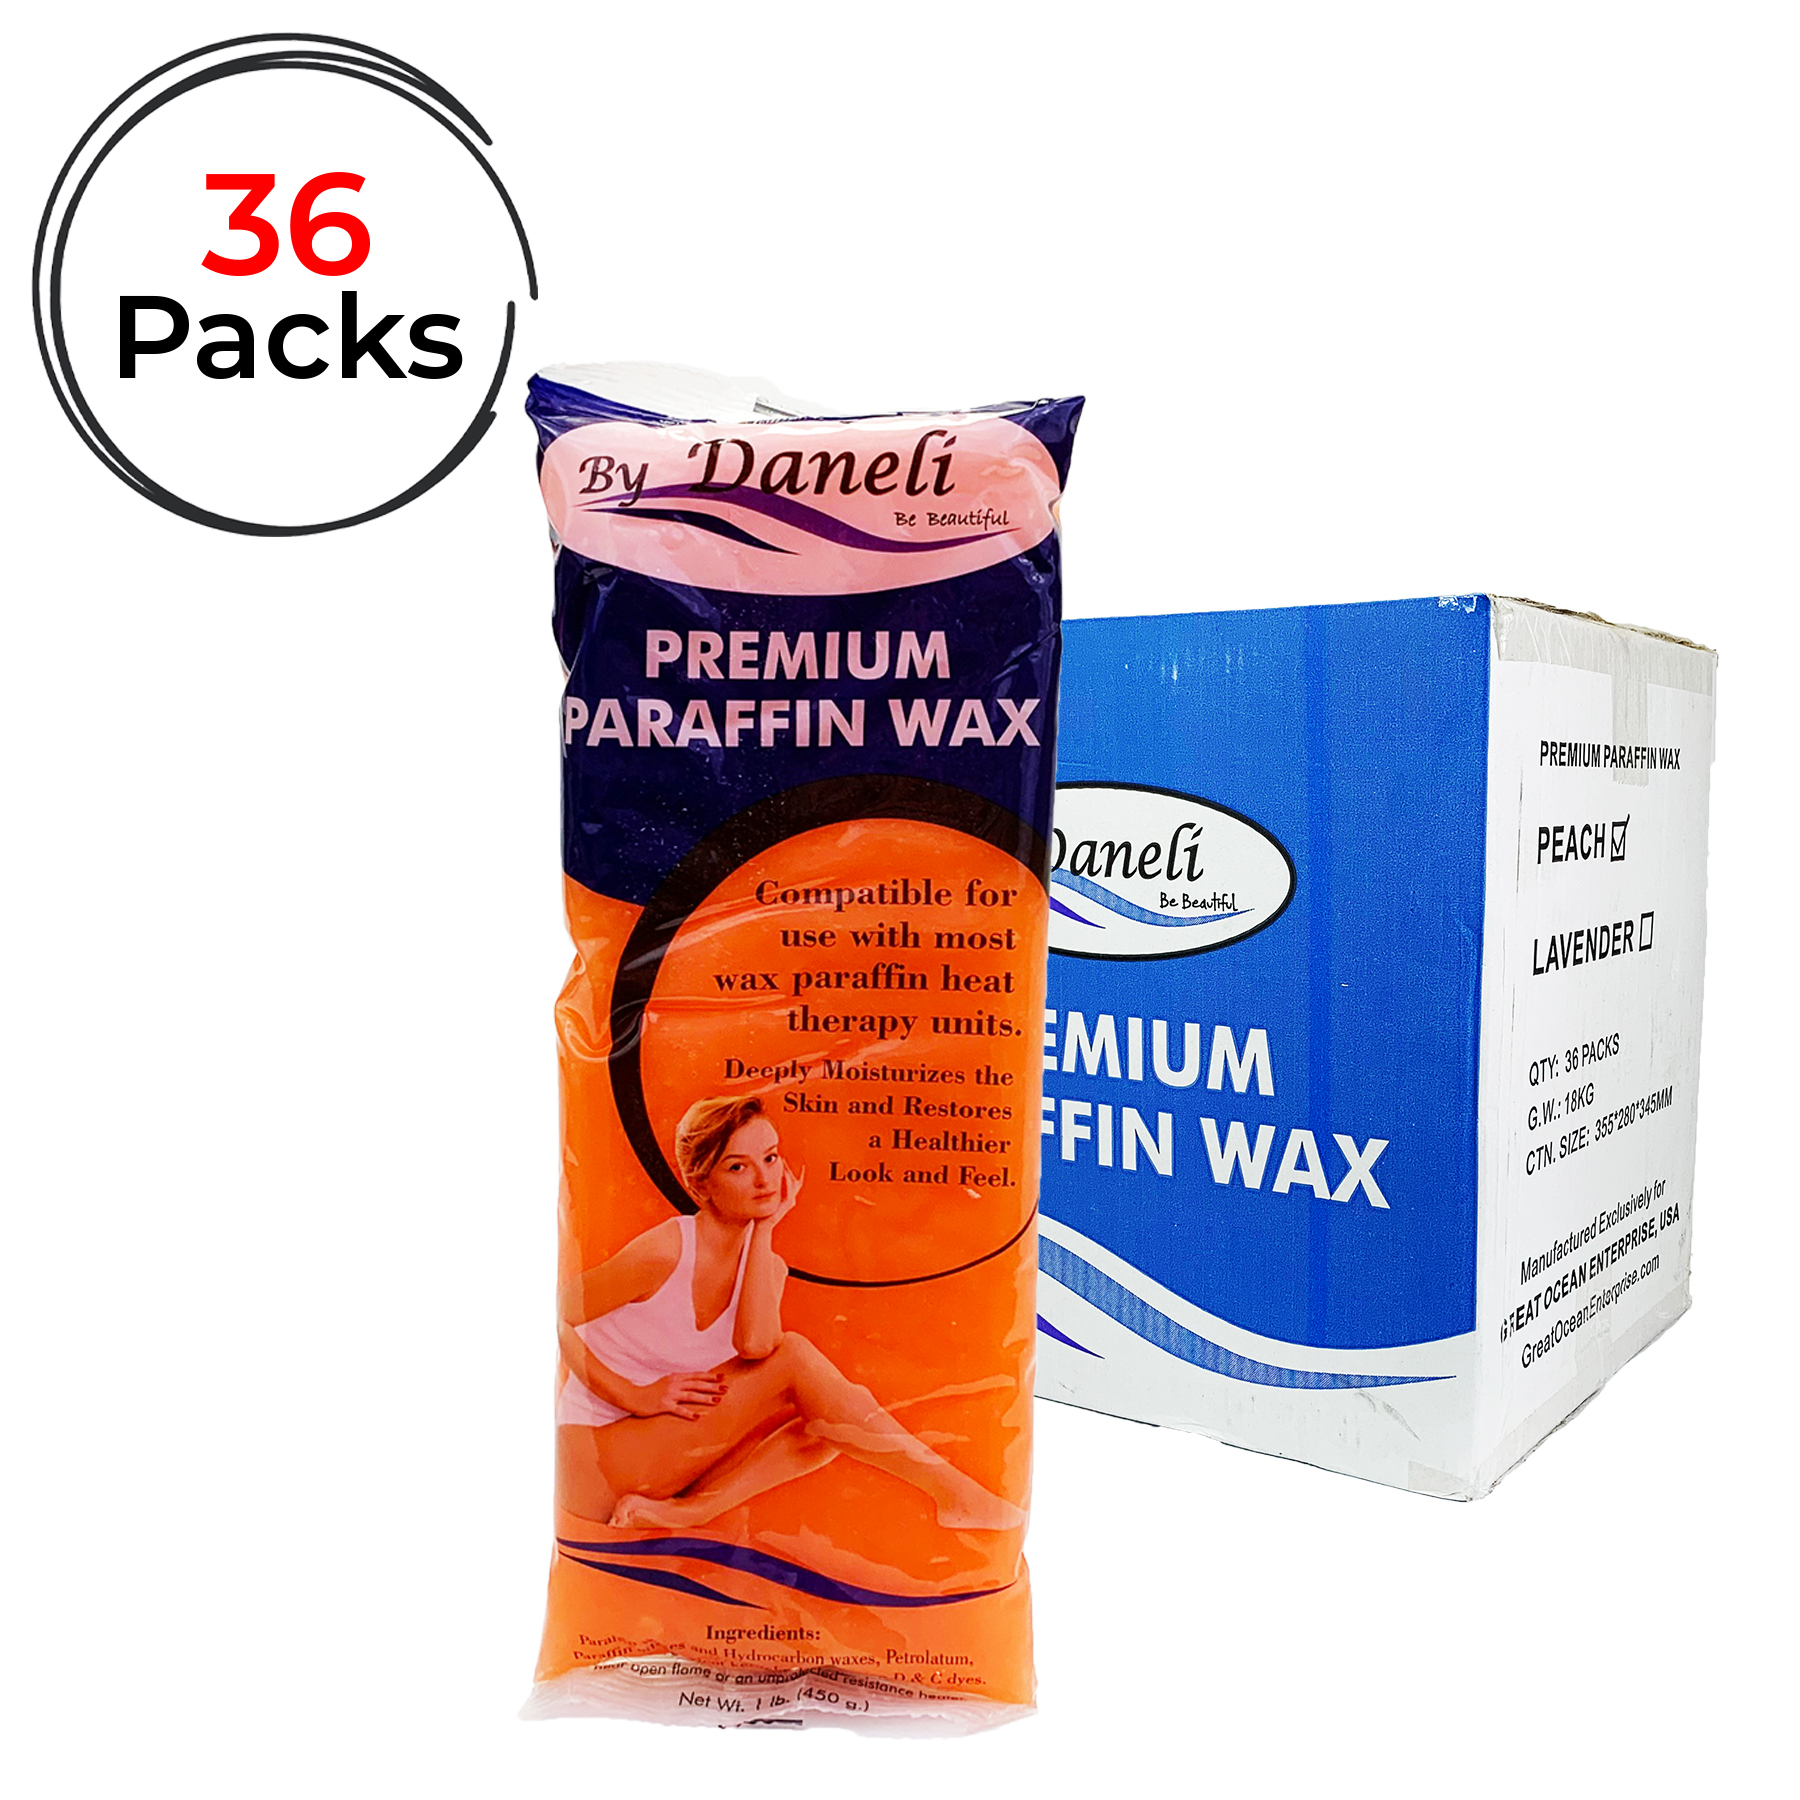 Keep Your Skin Protected this Winter with a Paraffin Wax Treatment